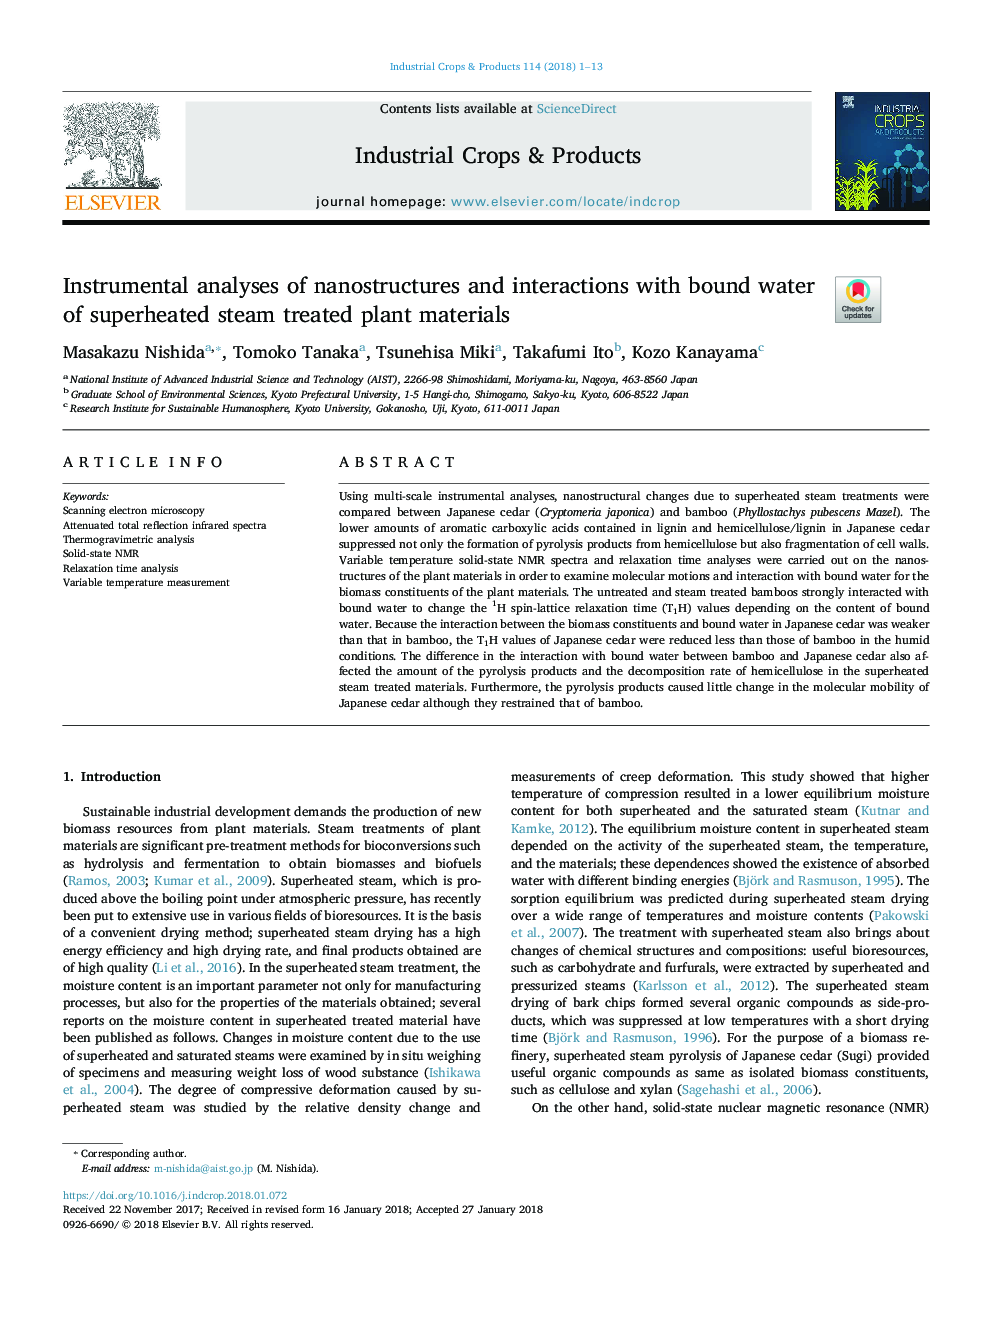 Instrumental analyses of nanostructures and interactions with bound water of superheated steam treated plant materials